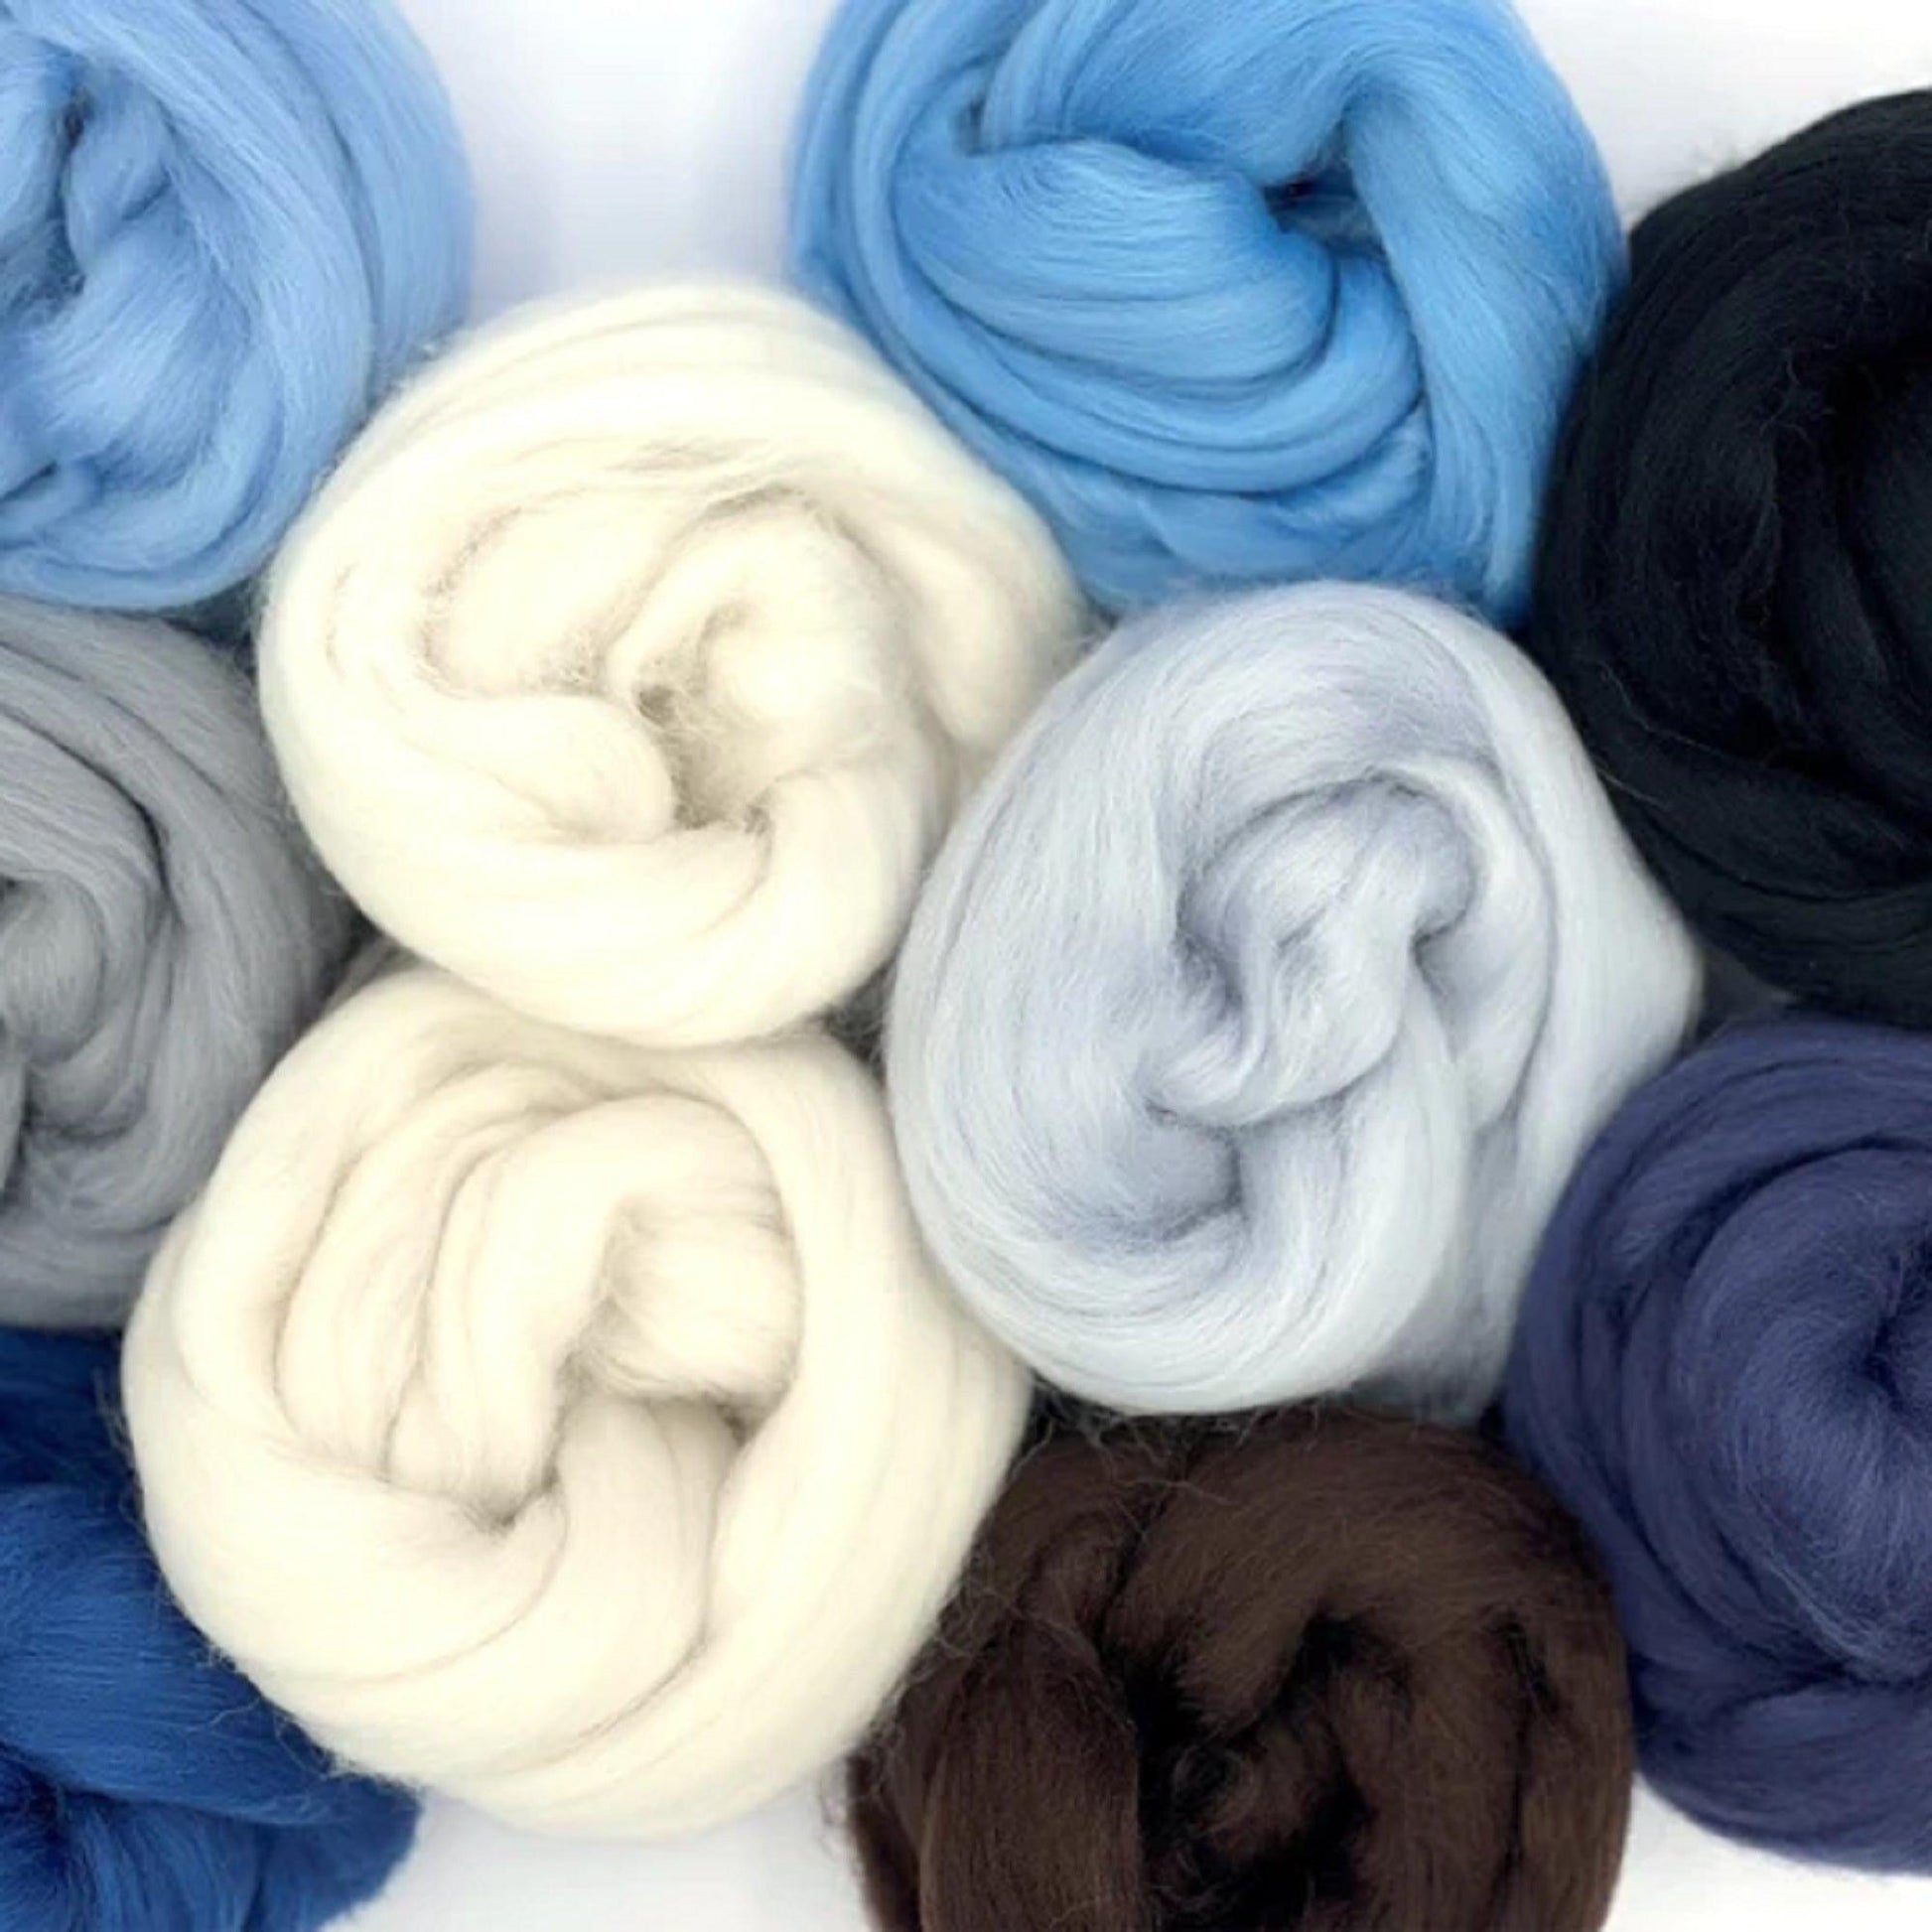 Mixed Merino Wool Variety Pack | Glacier Chill (Multicolored) 250 Grams, 23 Micron - Textile Indie 